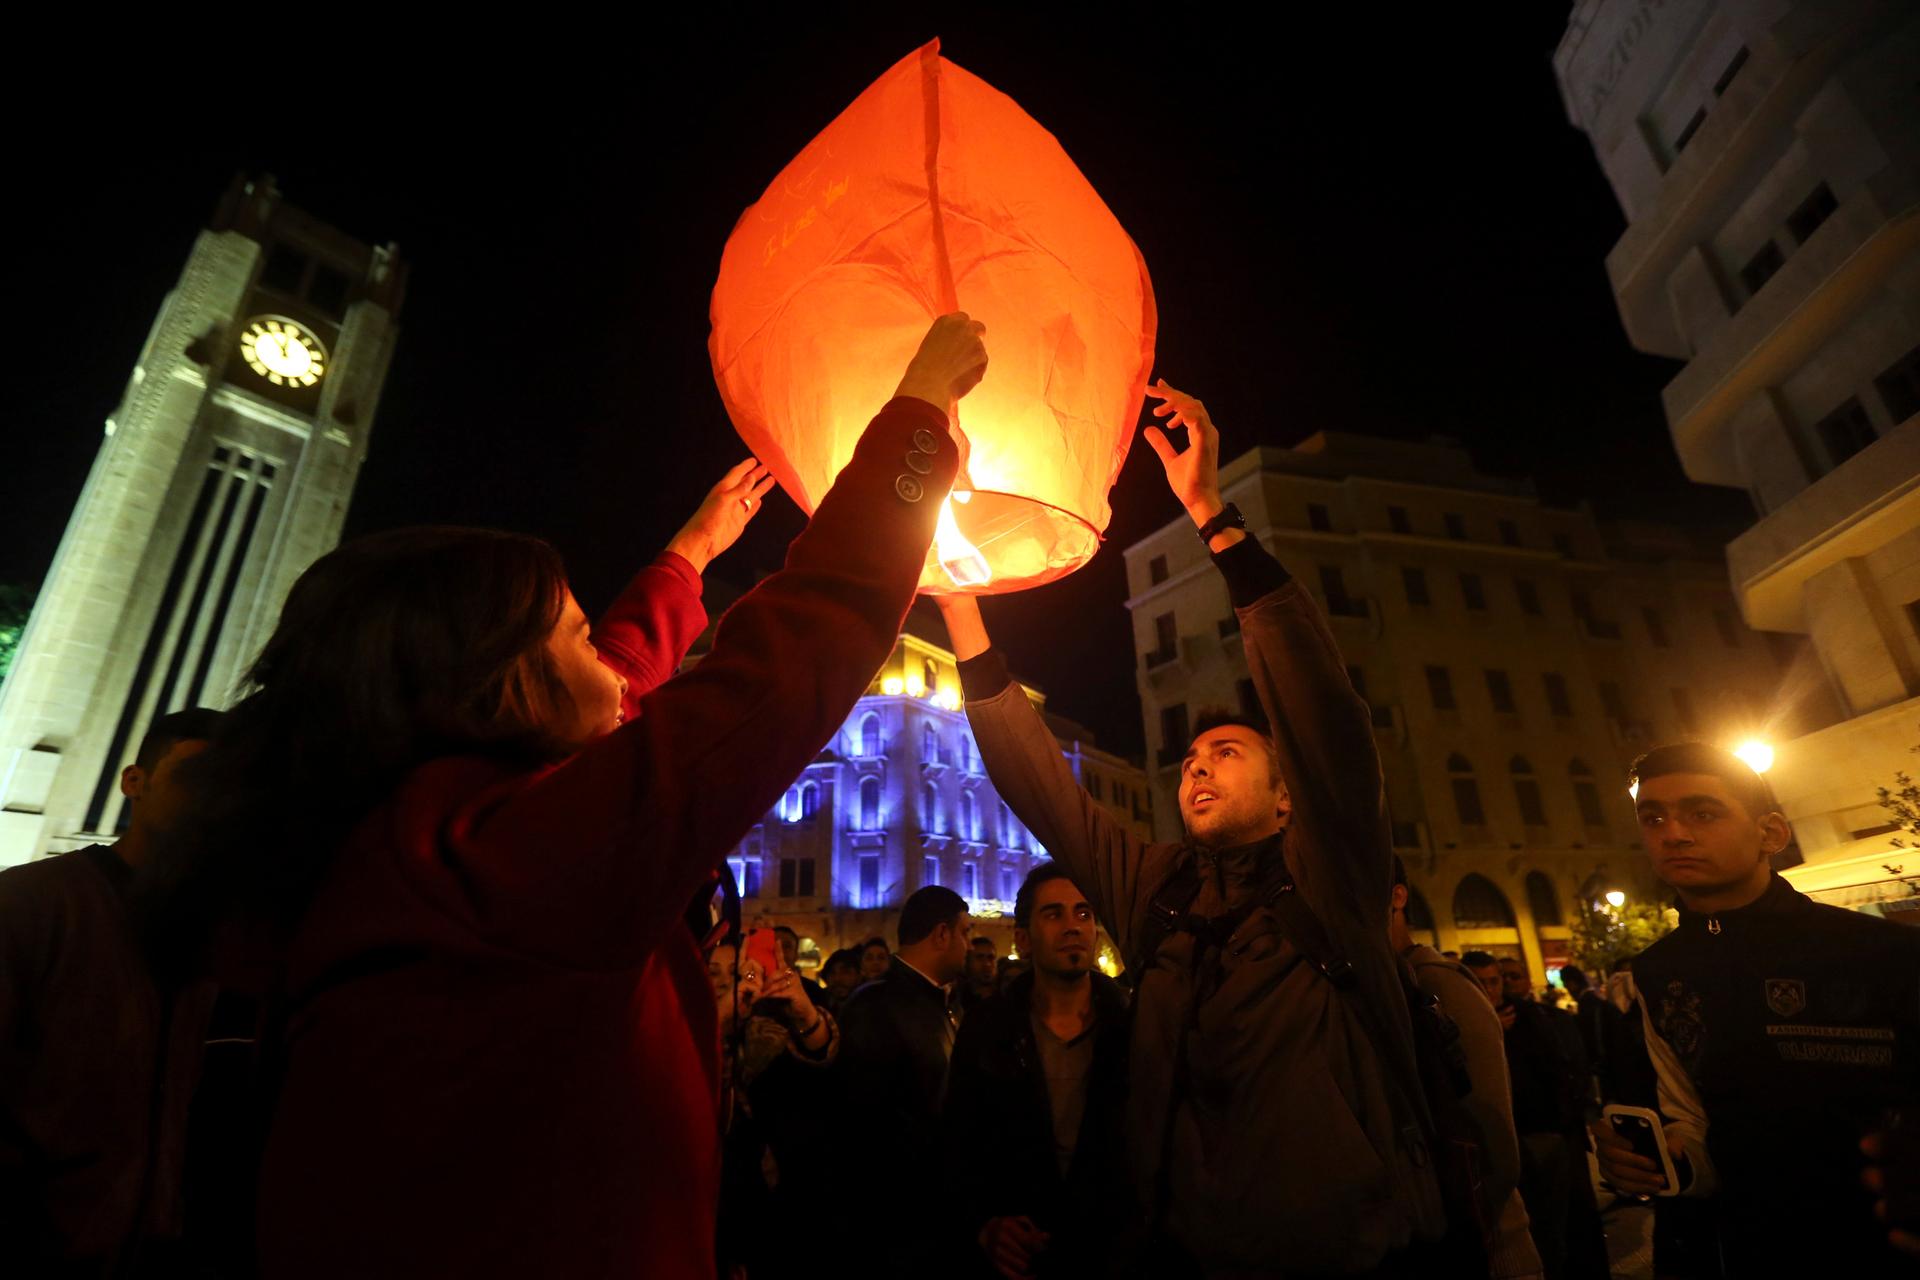 Beirut residents light a lantern during New Year's celebrations at Star Square